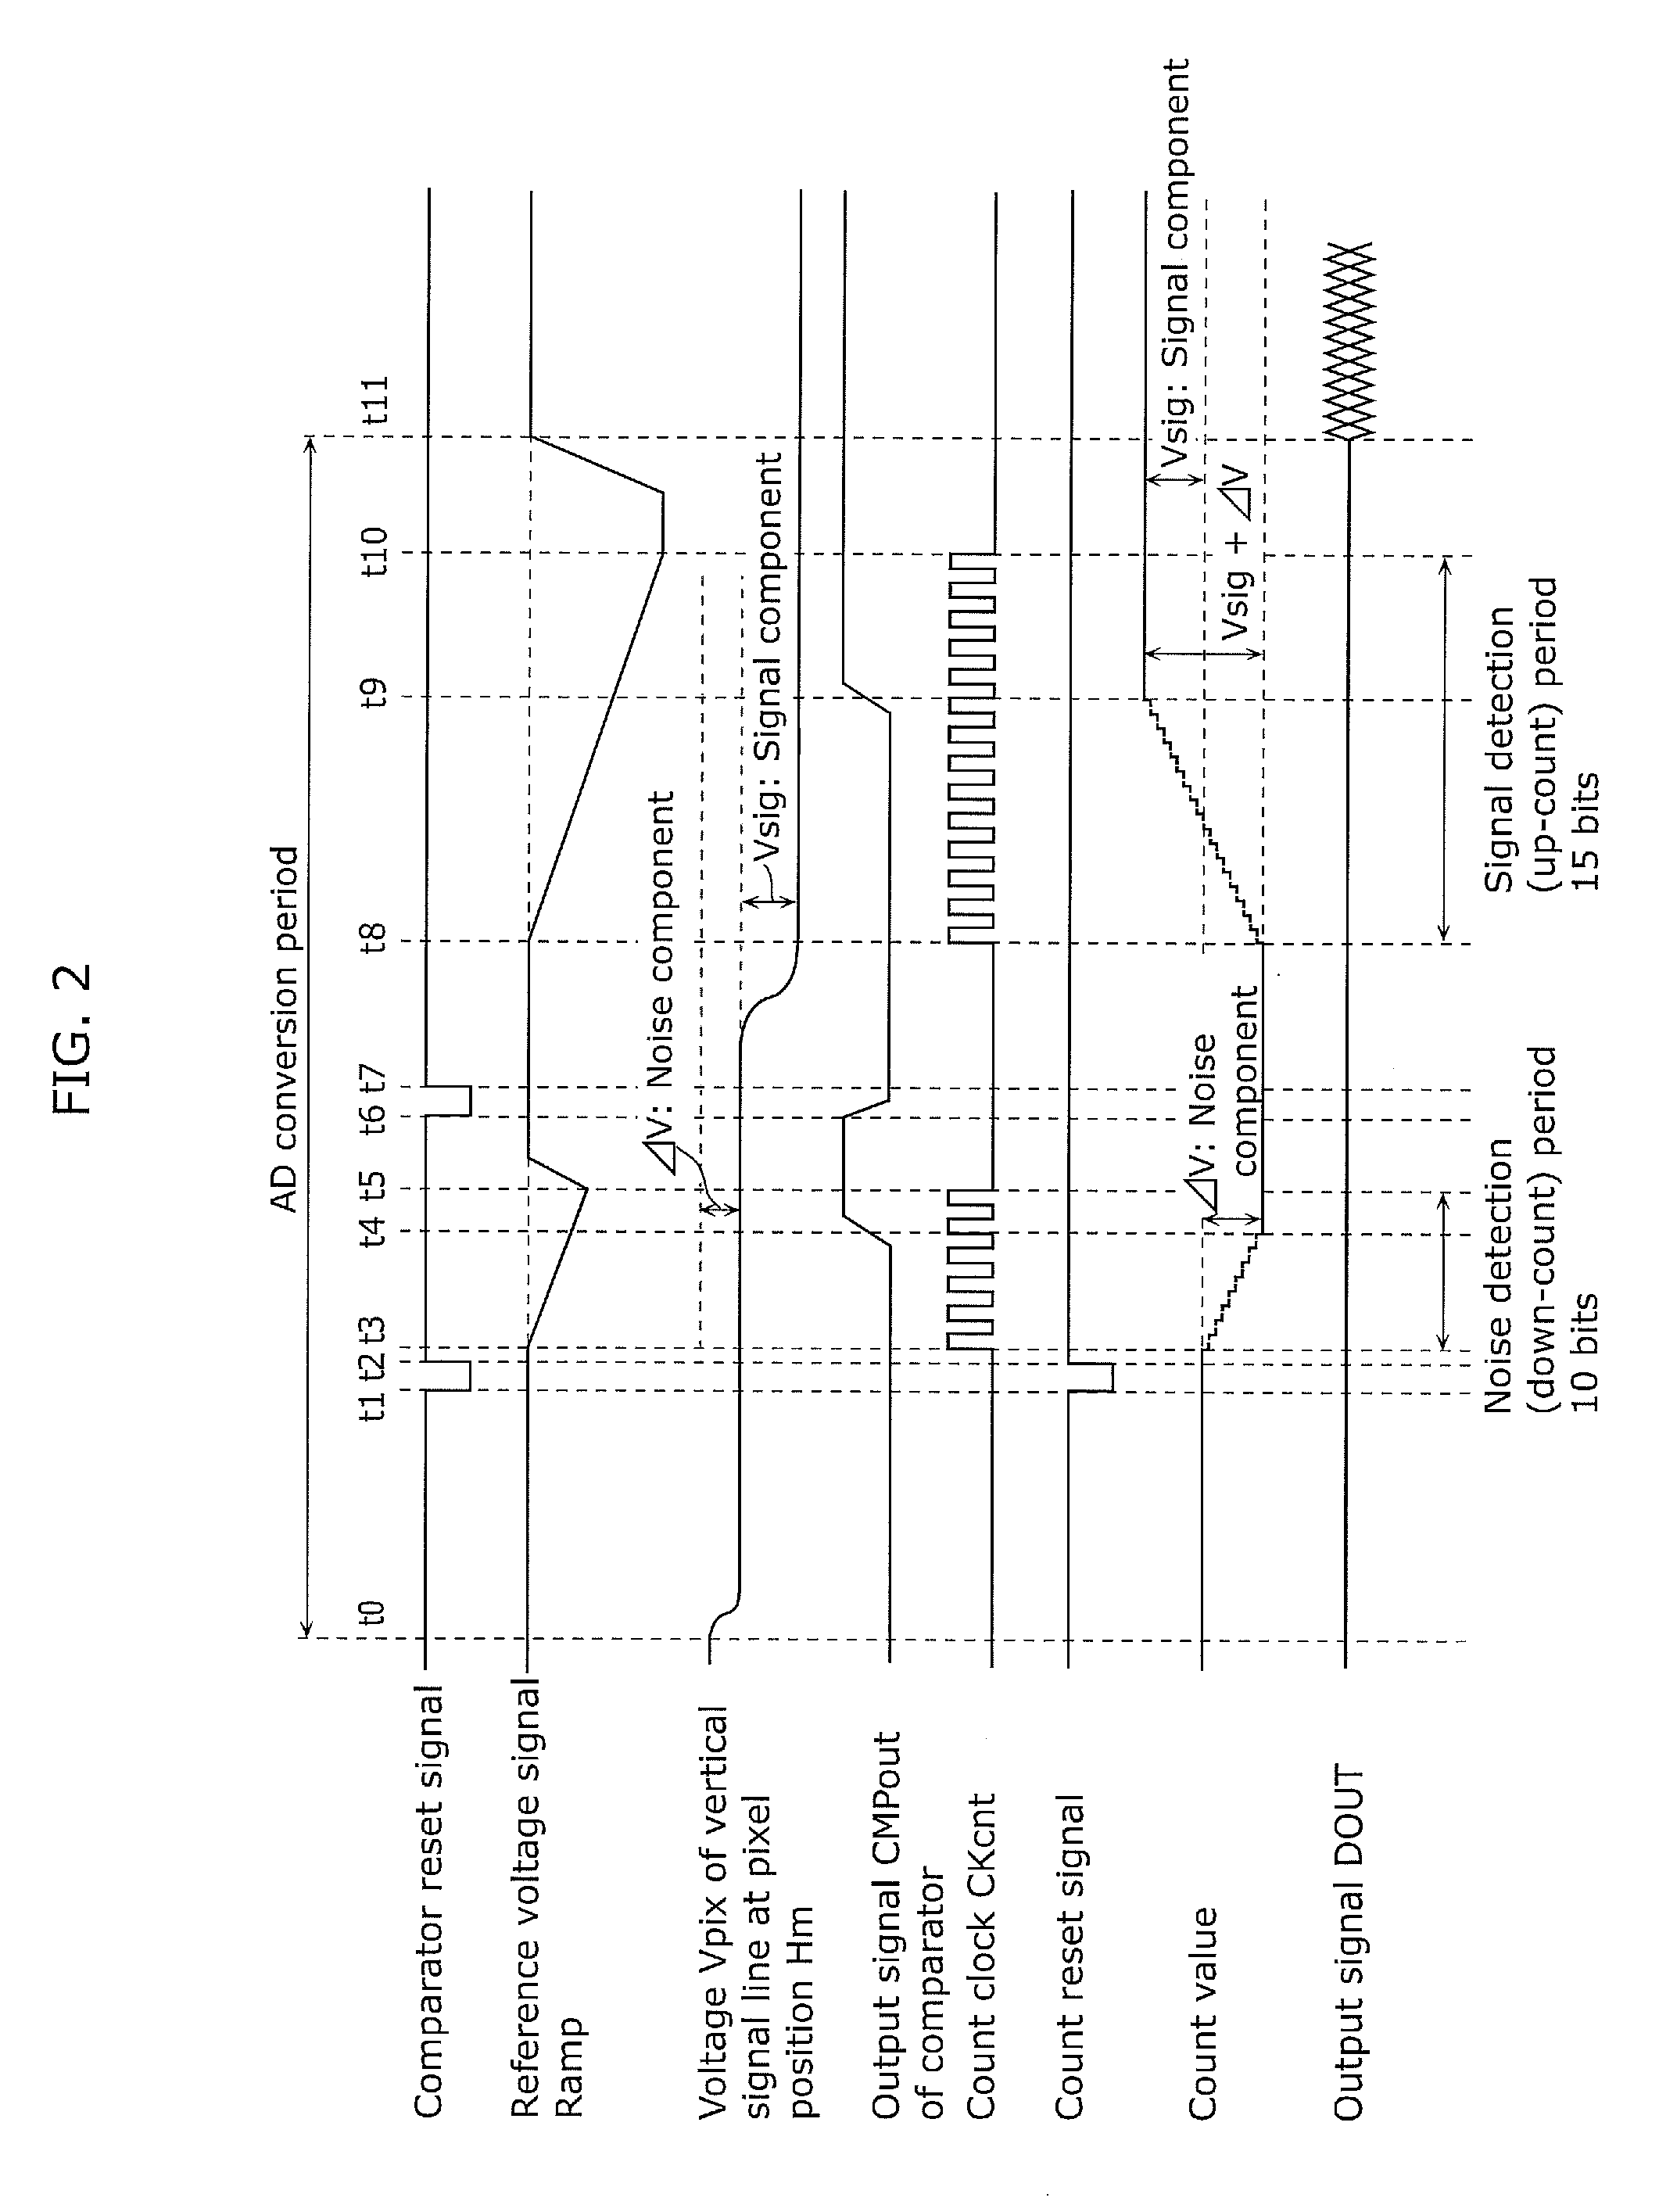 Solid-state imaging device comprising an analog to digital converter with column comparison circuits, column counter circuits, first and second inverters, and buffers